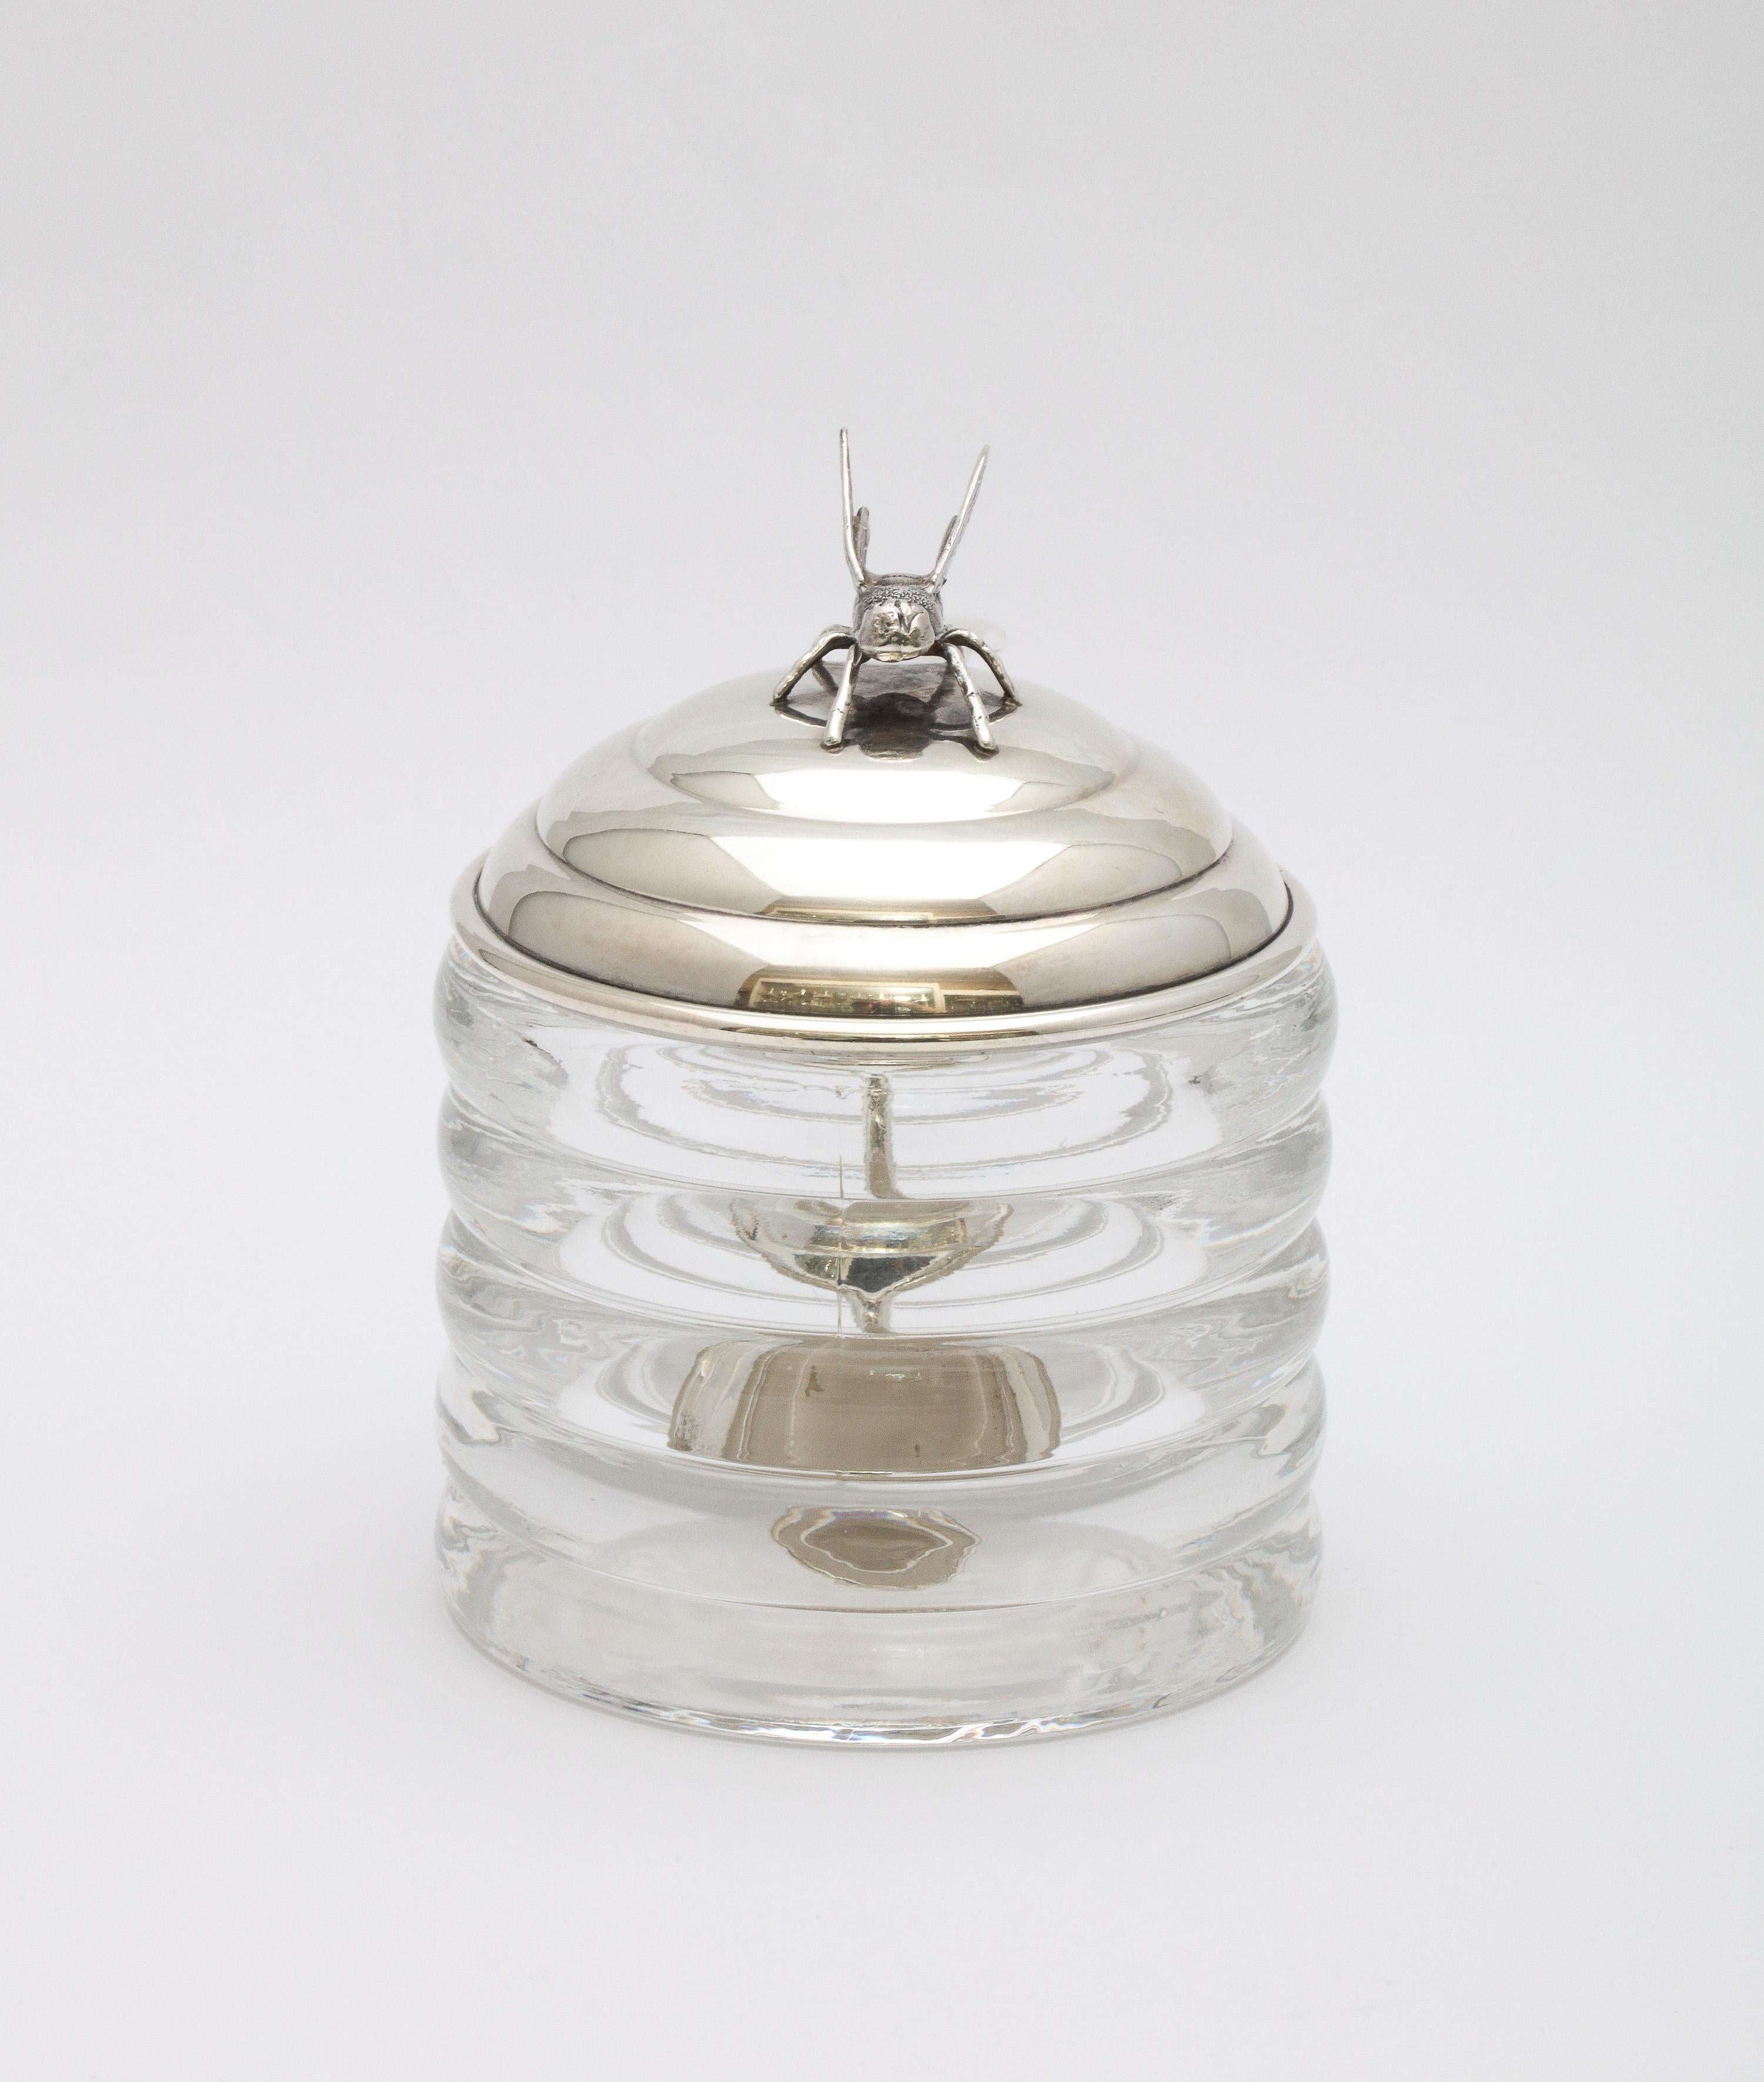 Art Deco Period Sterling Silver-Mounted Beehive-Form Honey Jar With Spoon 2